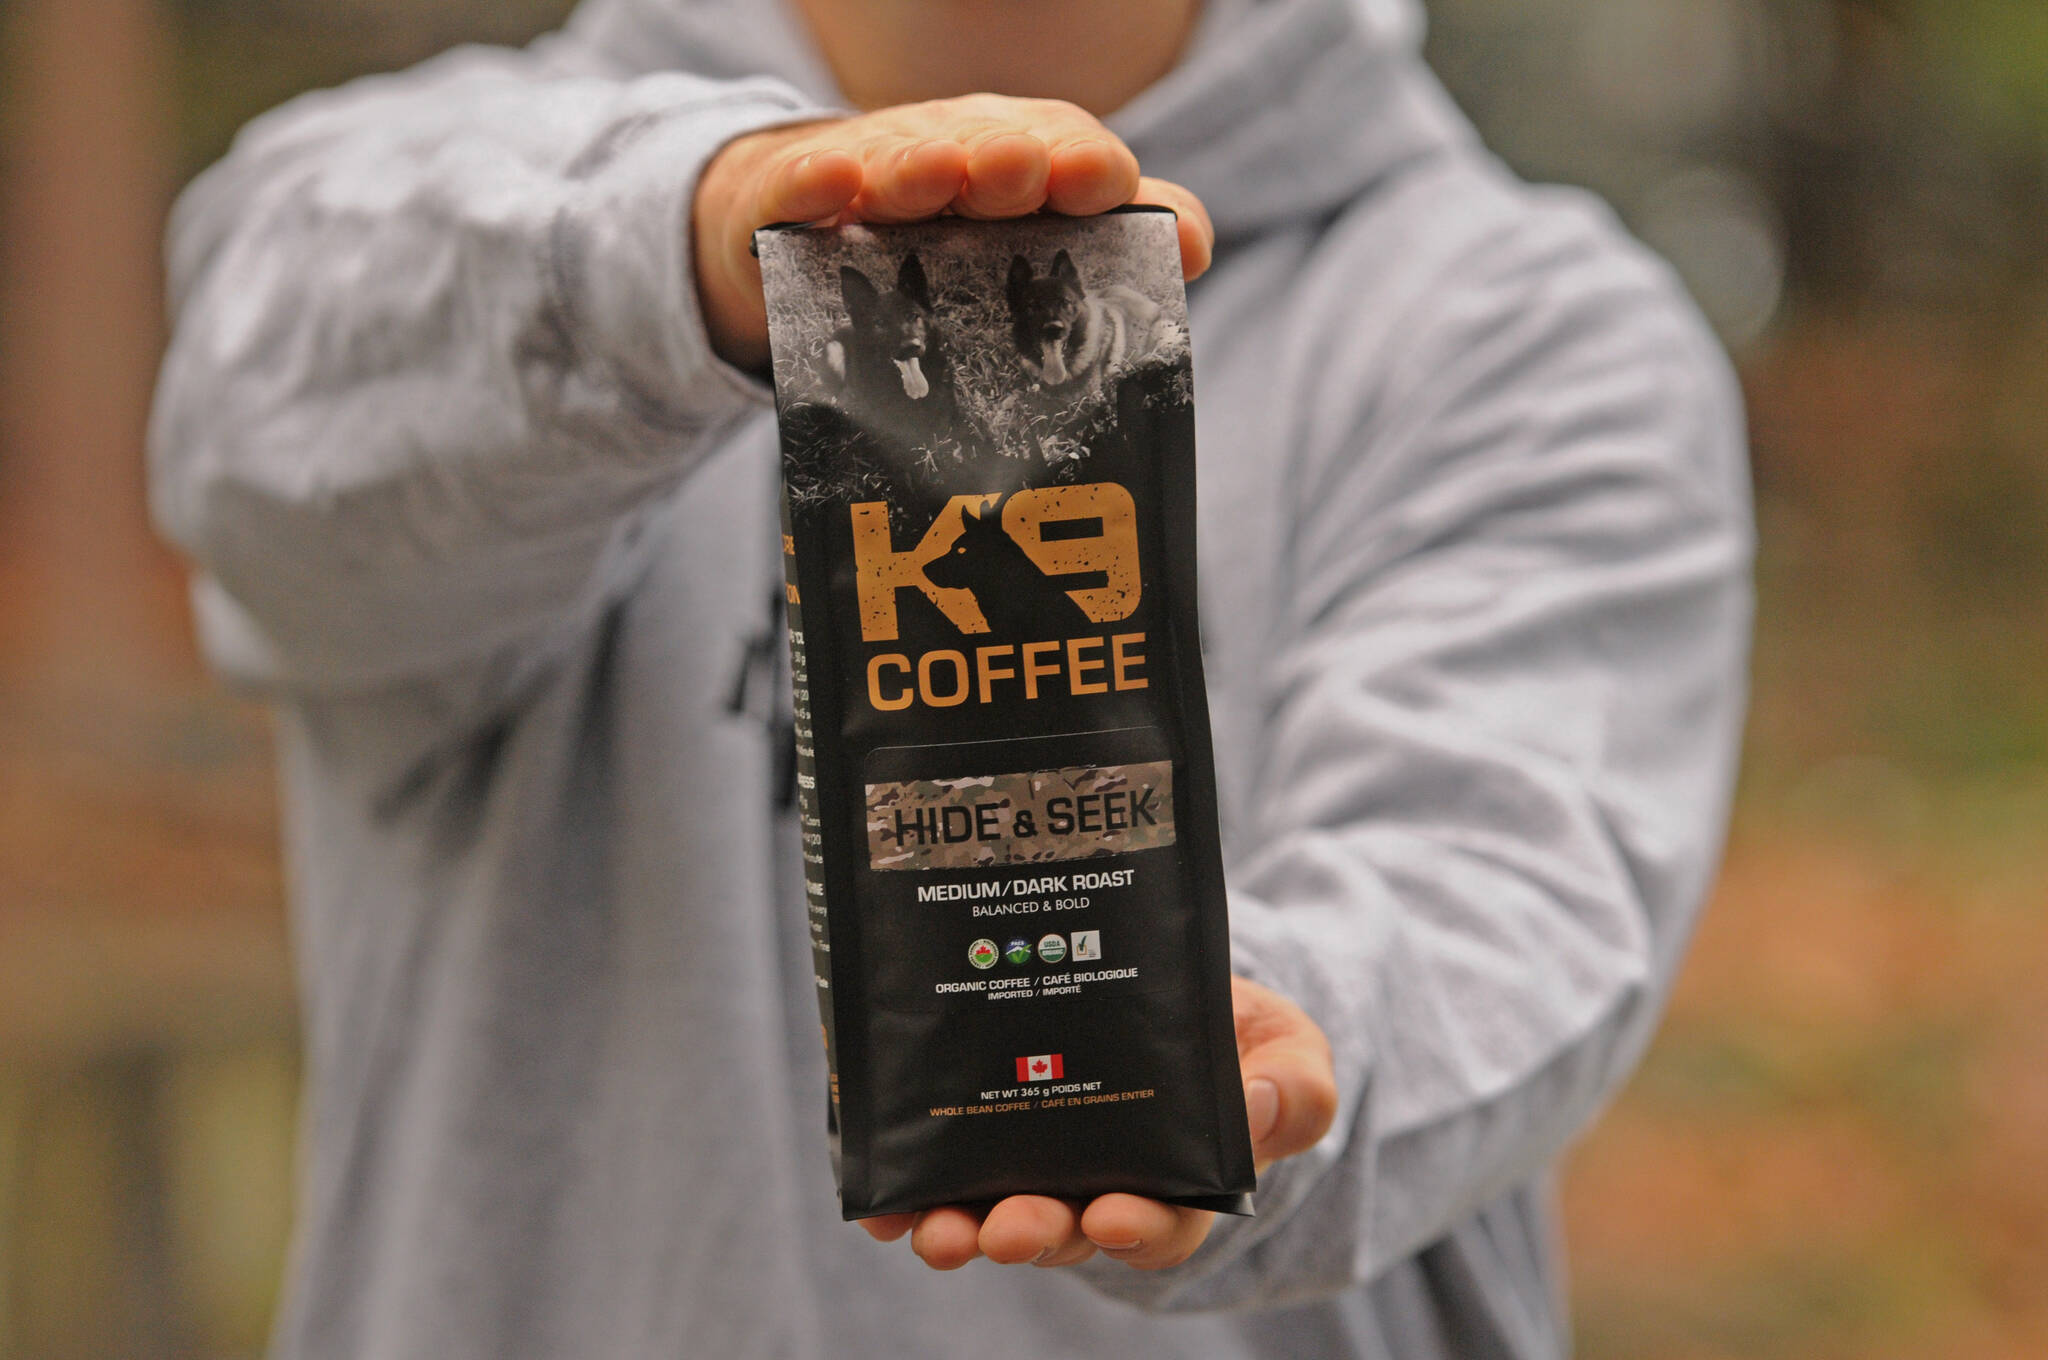 K9 Coffee is one of the products folks can buy from Support Retired Legends. The local business raises money for a charity called Neds Wish which provides financial support to help pay for the medical bills of retired service dogs. (Jenna Hauck/ Chilliwack Progress)